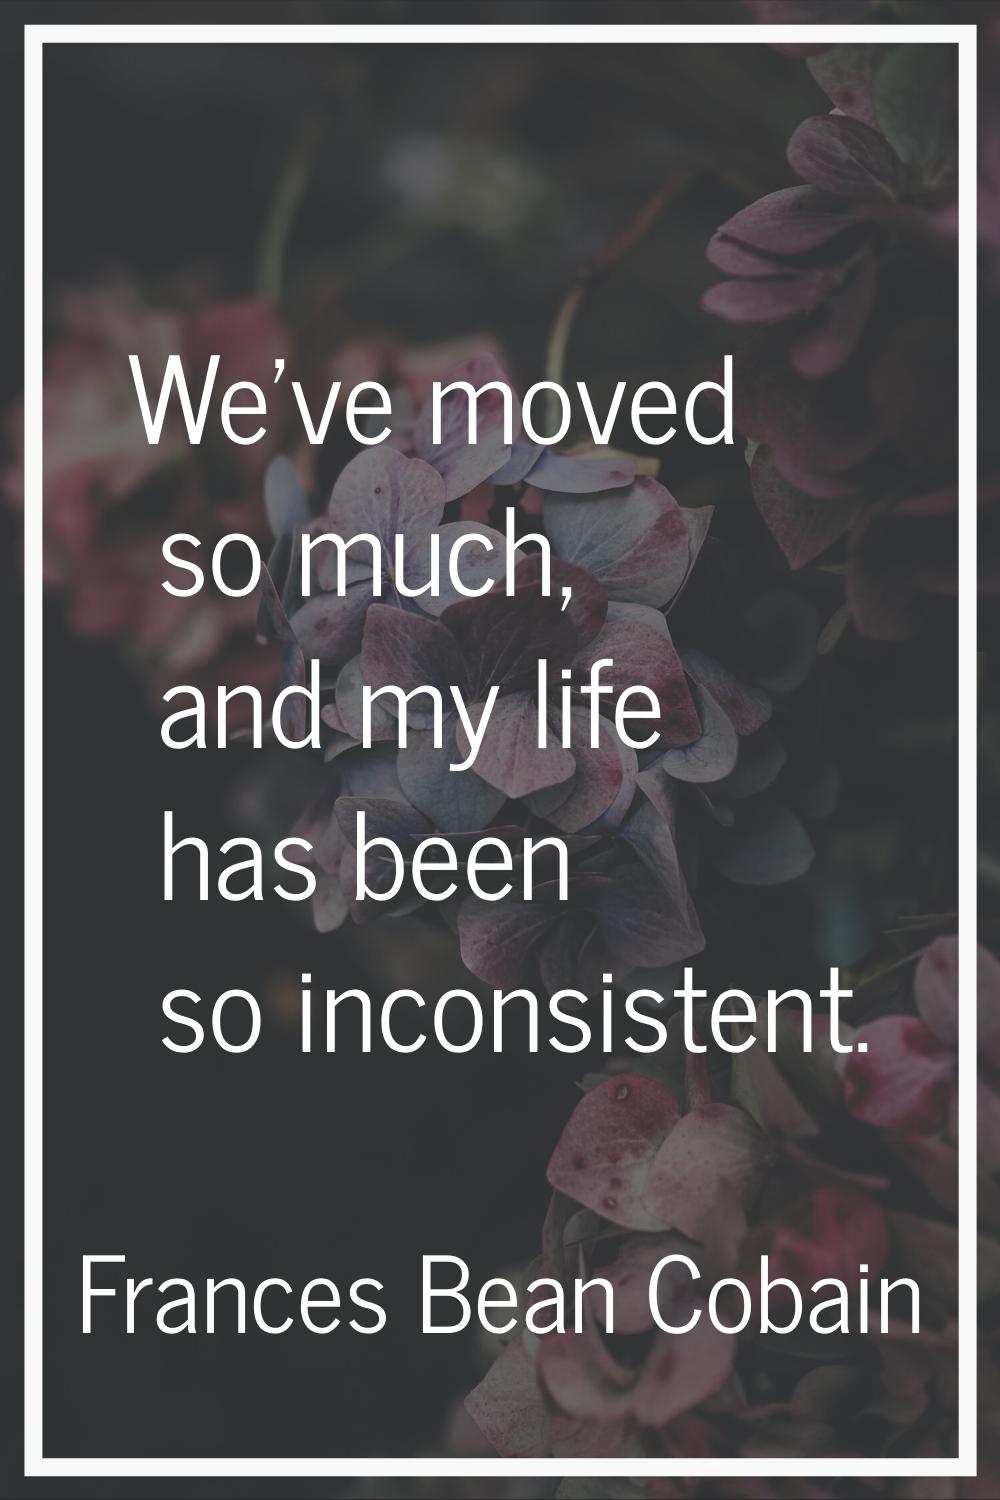 We've moved so much, and my life has been so inconsistent.